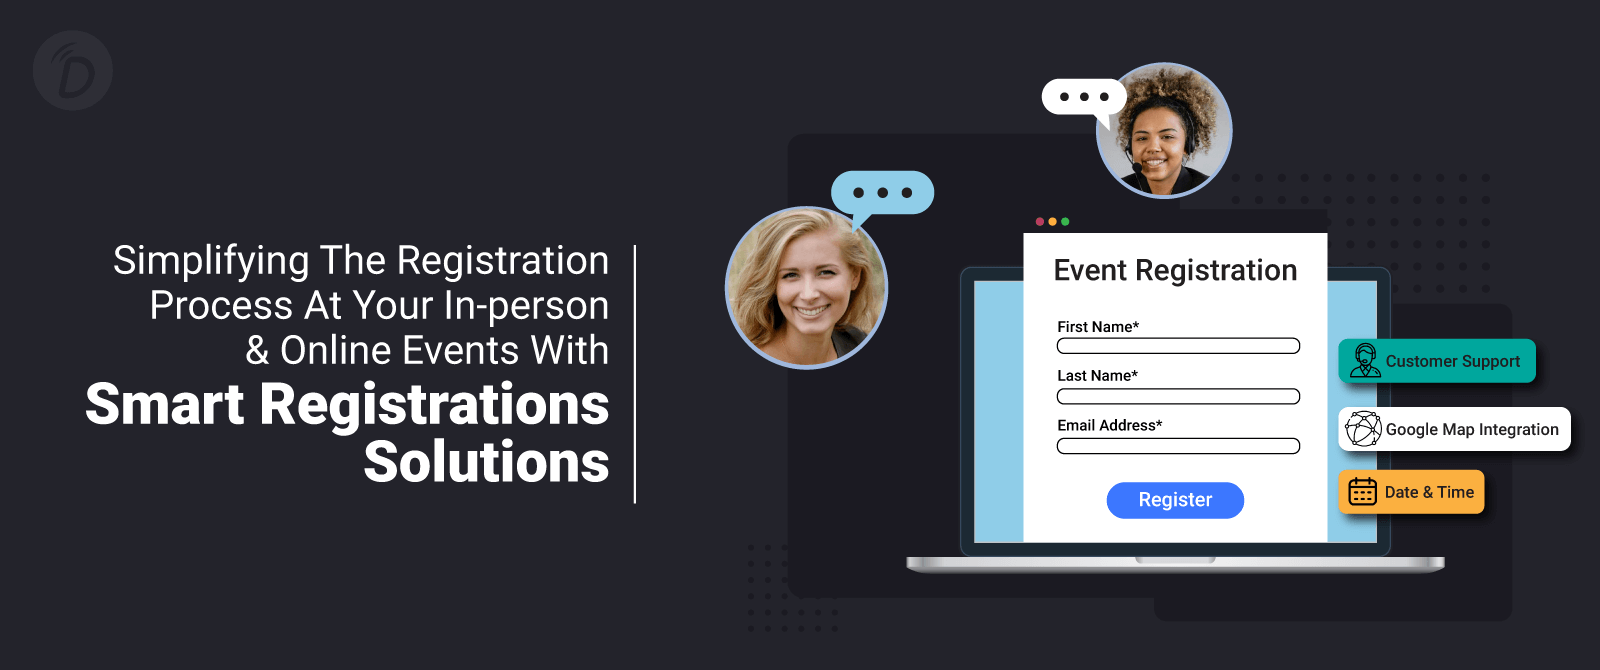 Simplifying the Registration Process at Your In-Person & Online Events with Smart Registrations Solutions